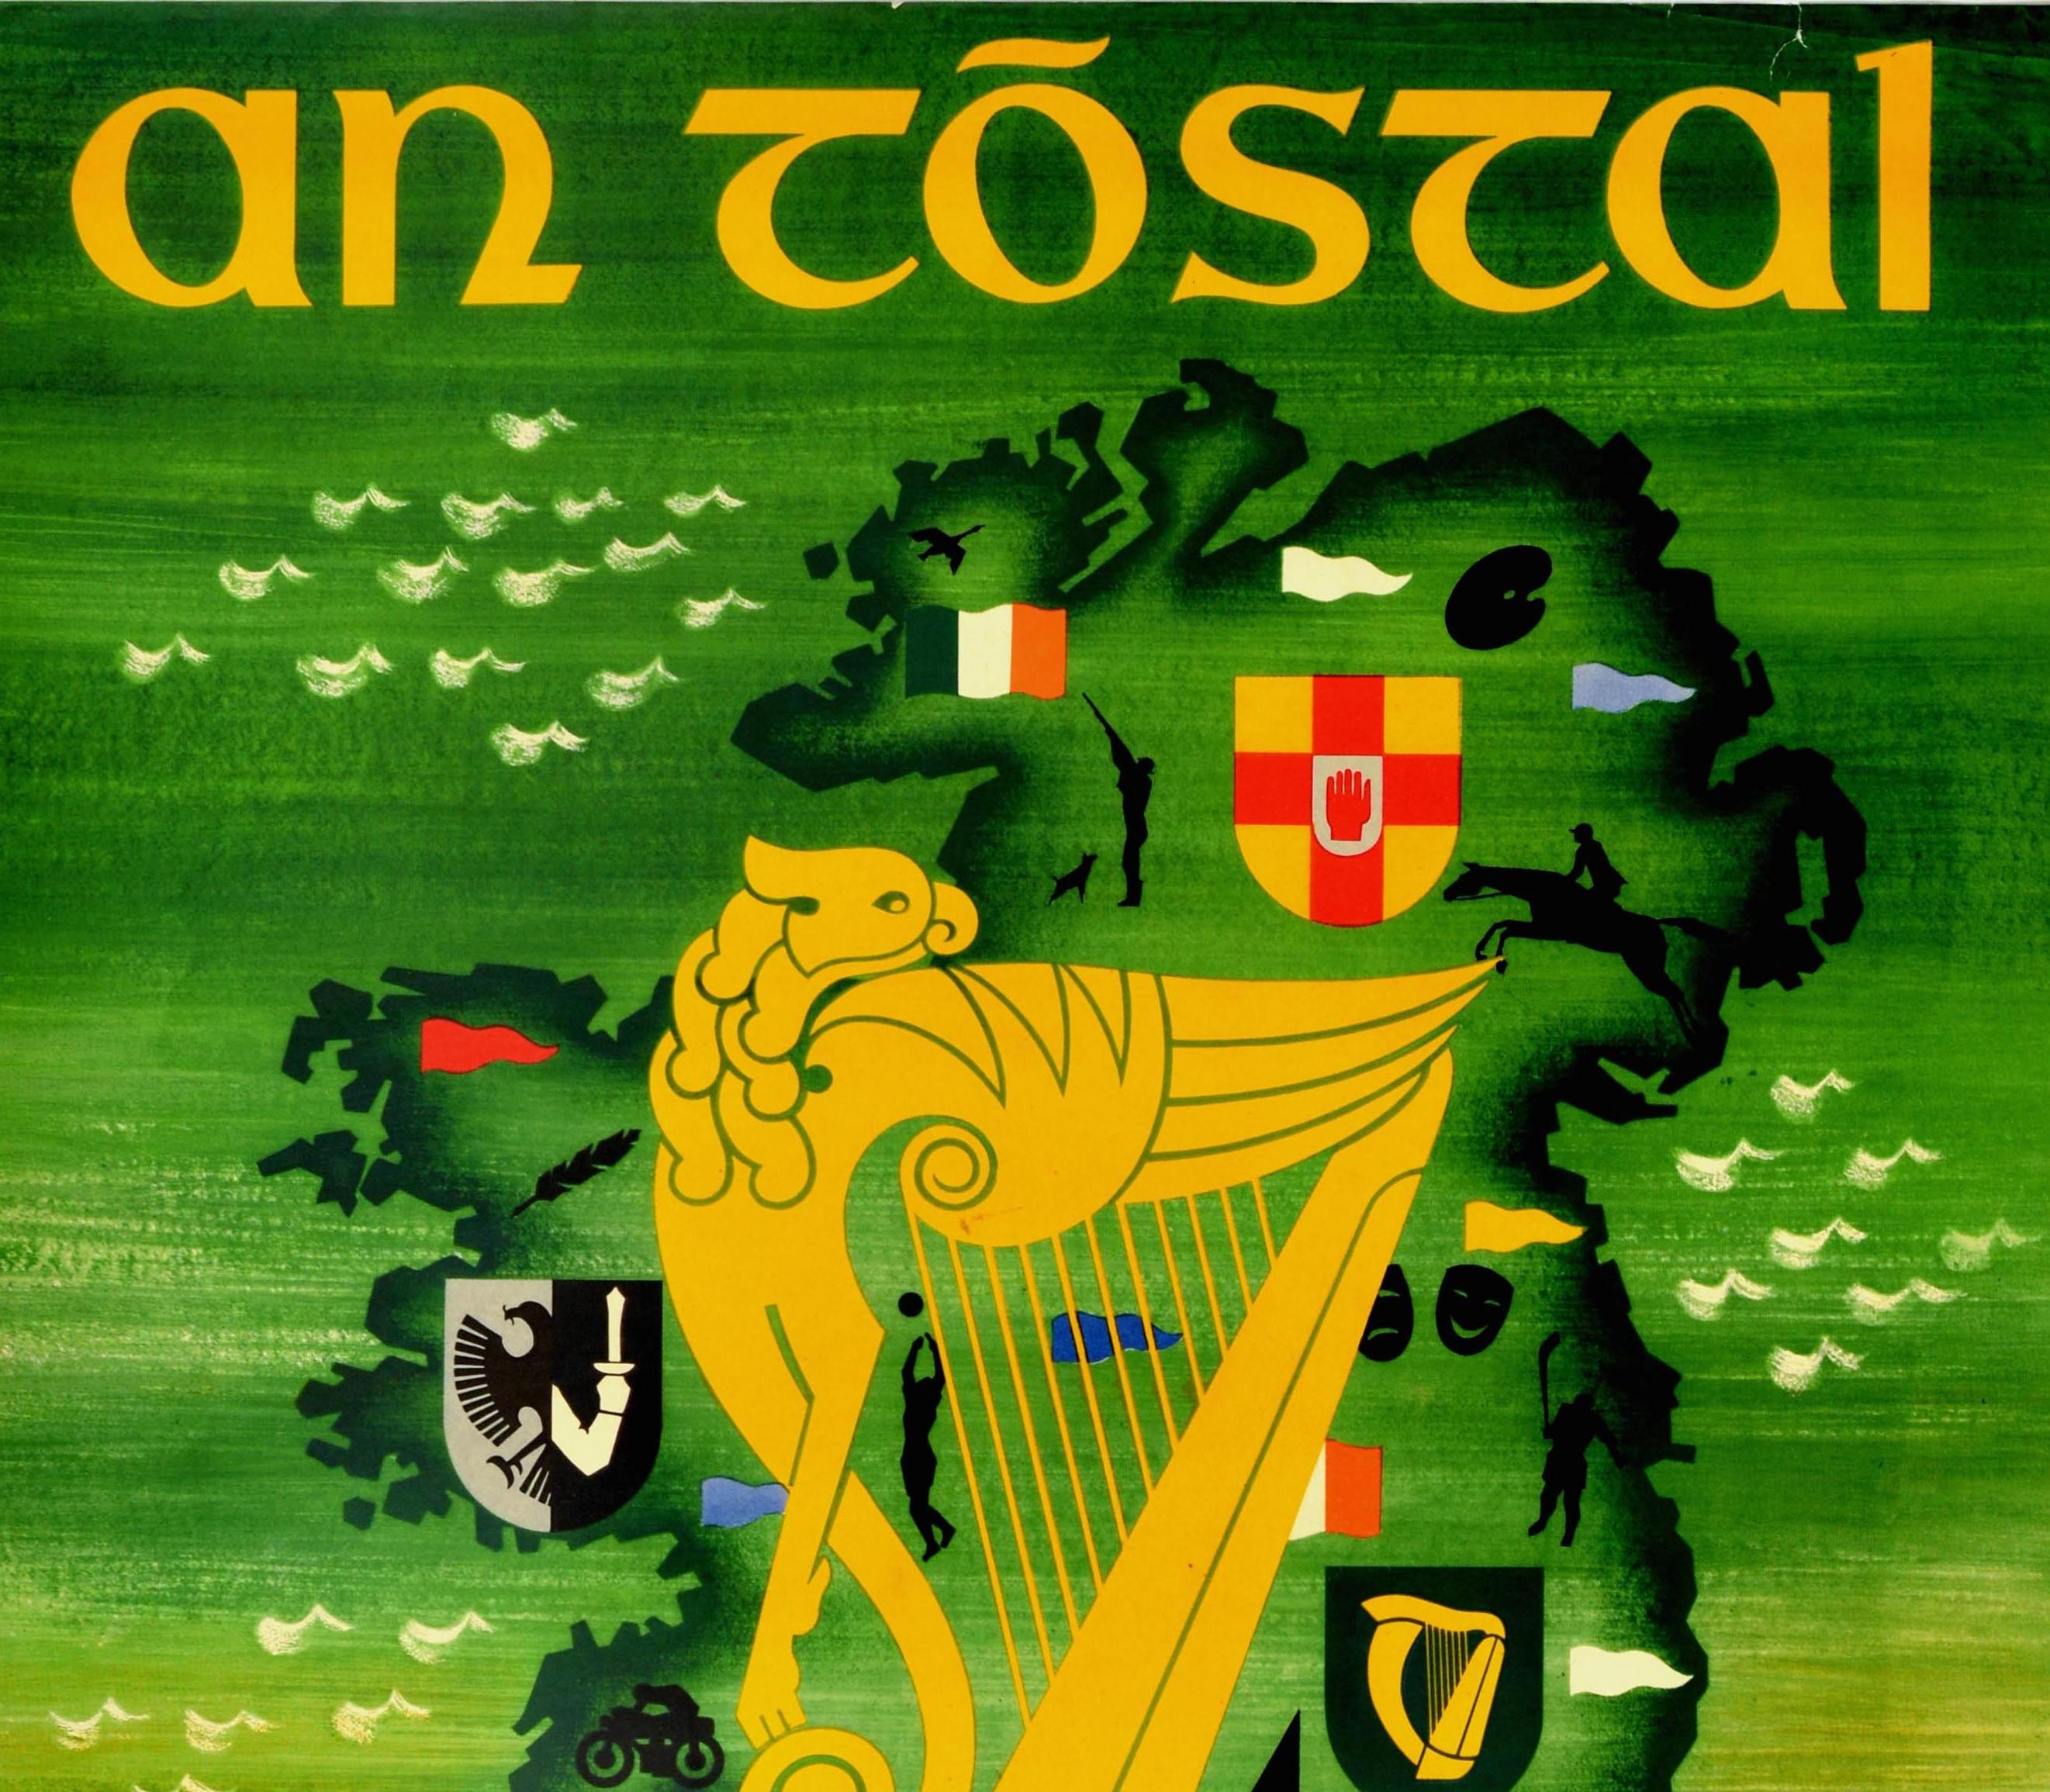 Original vintage travel poster - An Tostal Ireland At Home - for the annual festival held on 18 April to 9 May 1954 featuring the Celtic harp on an outline map of Ireland depicting various cultural and sport images including shooting, an artist